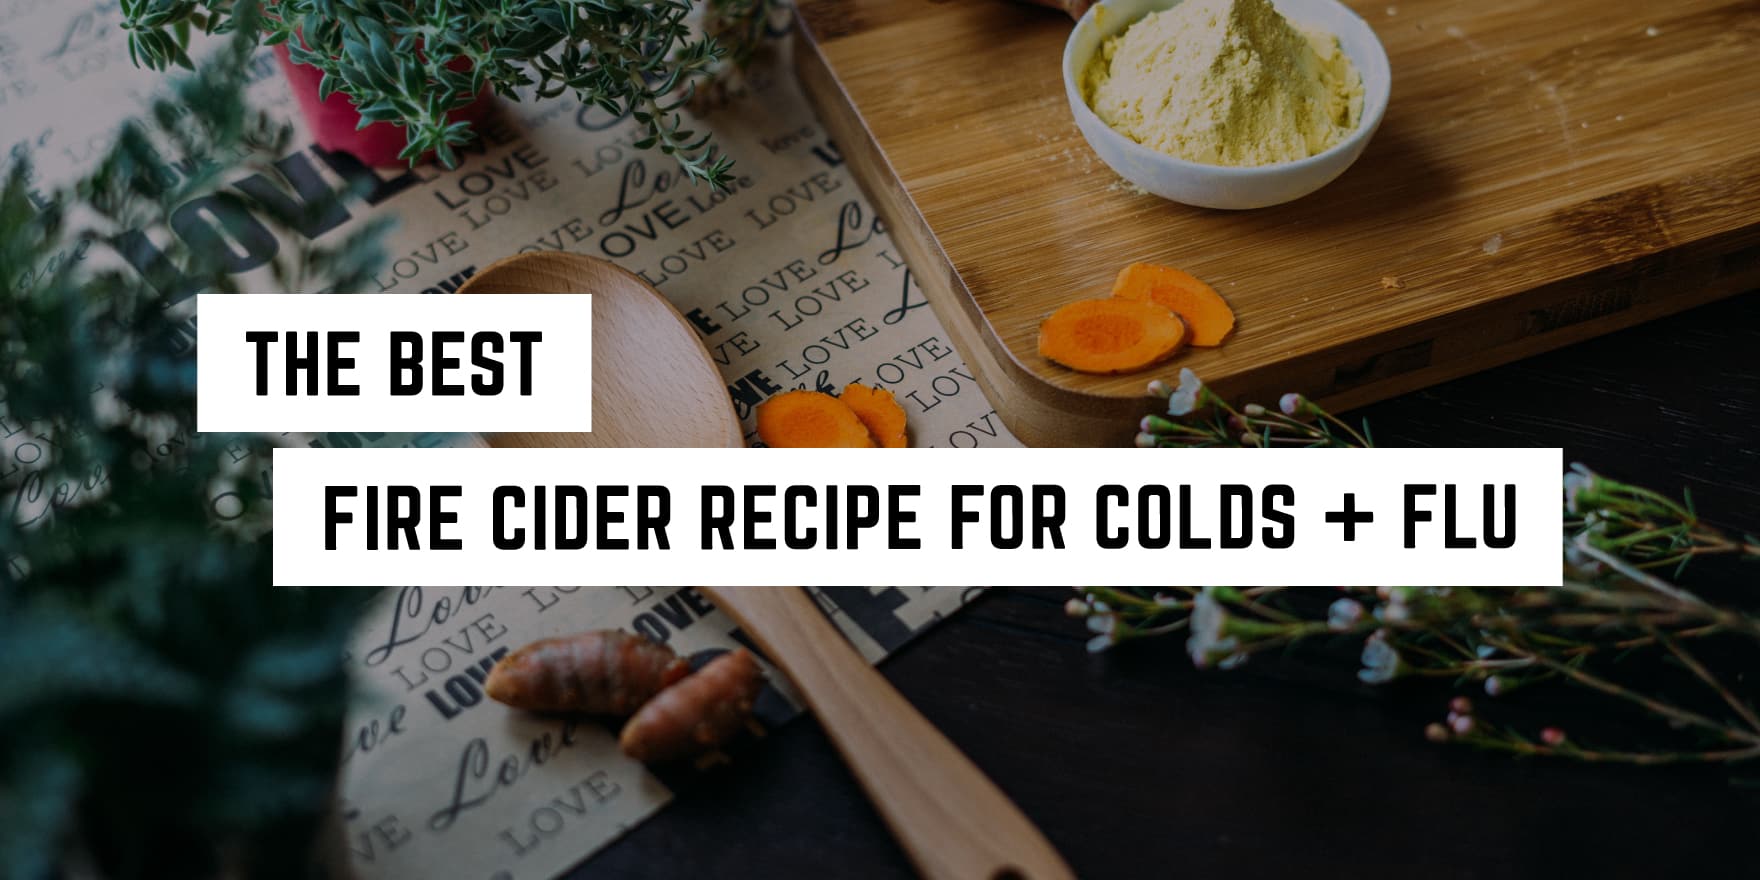 A cozy, witchy kitchen scene featuring ingredients for making a natural remedy, with the caption "the best fire cider recipe for colds + flu".